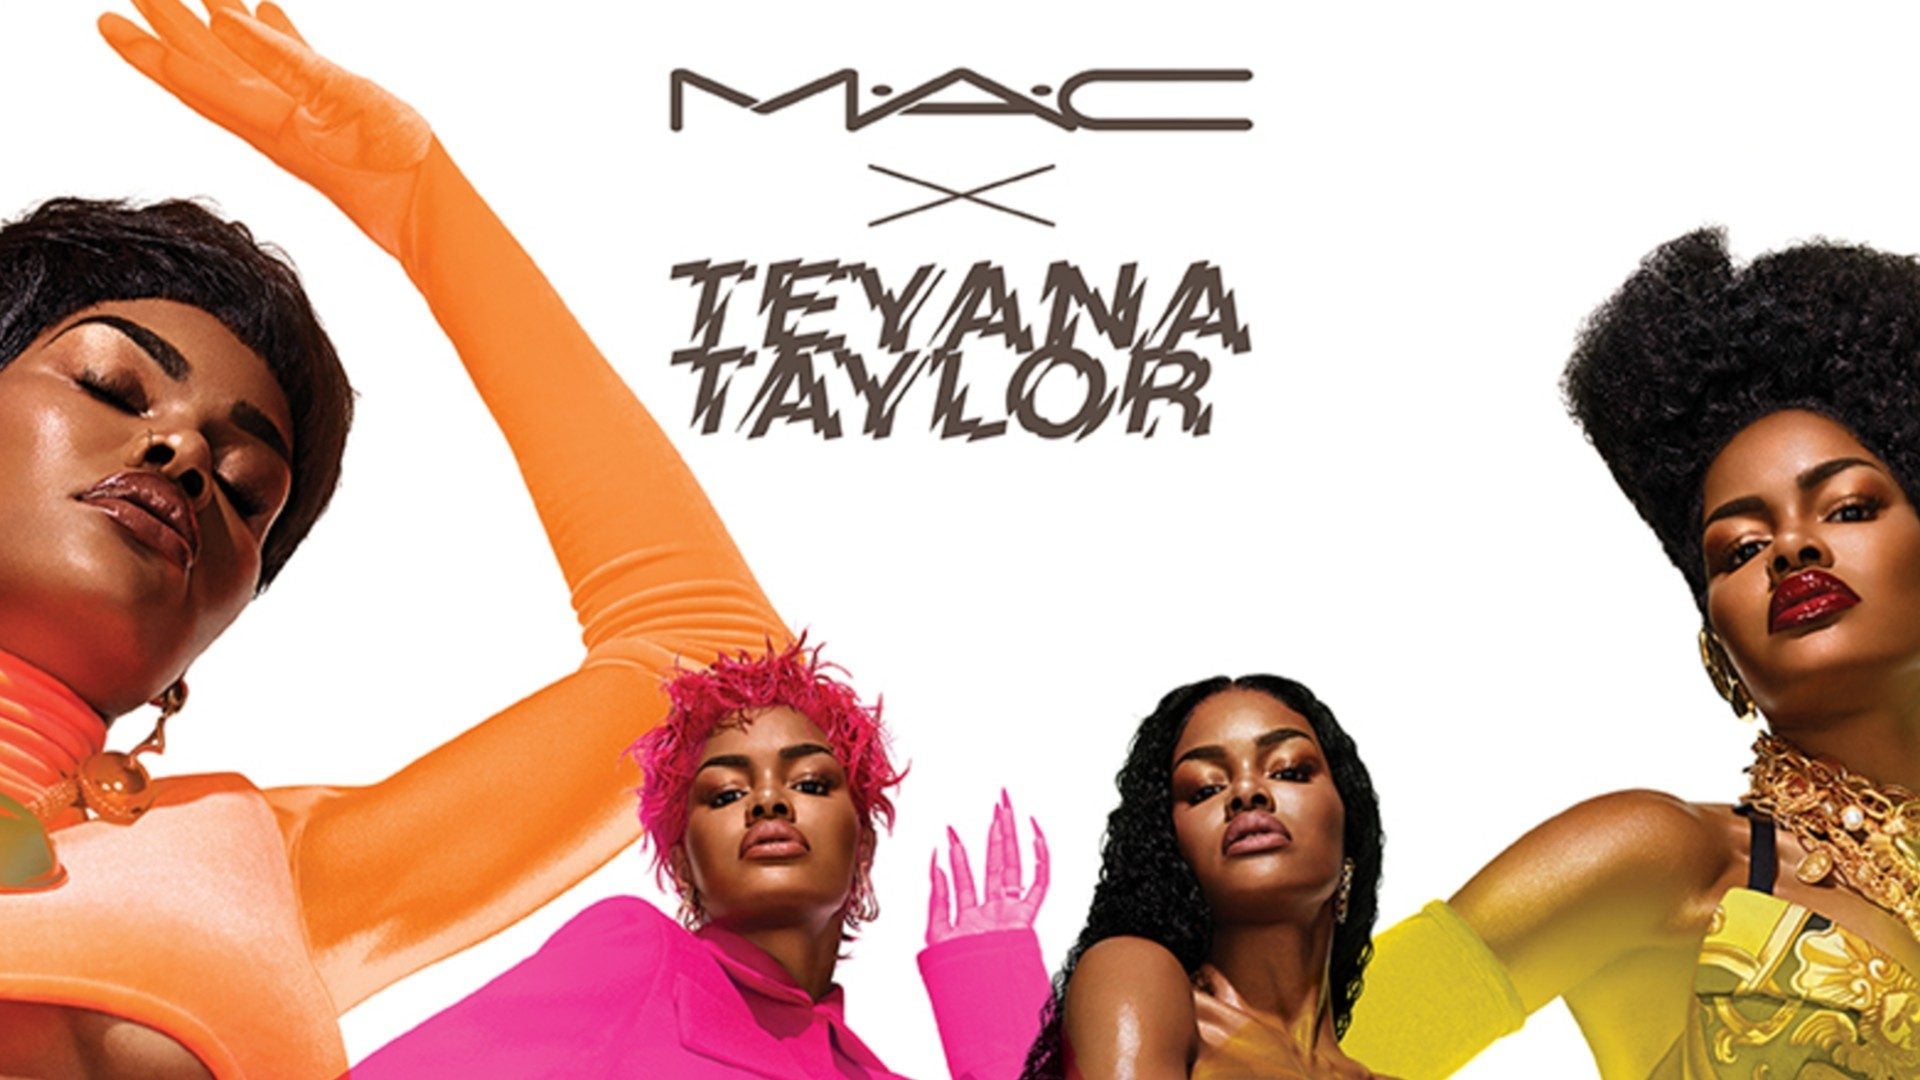 MAC Is Bringing Back Its Limited Edition Teyana Taylor Collection For The Holidays